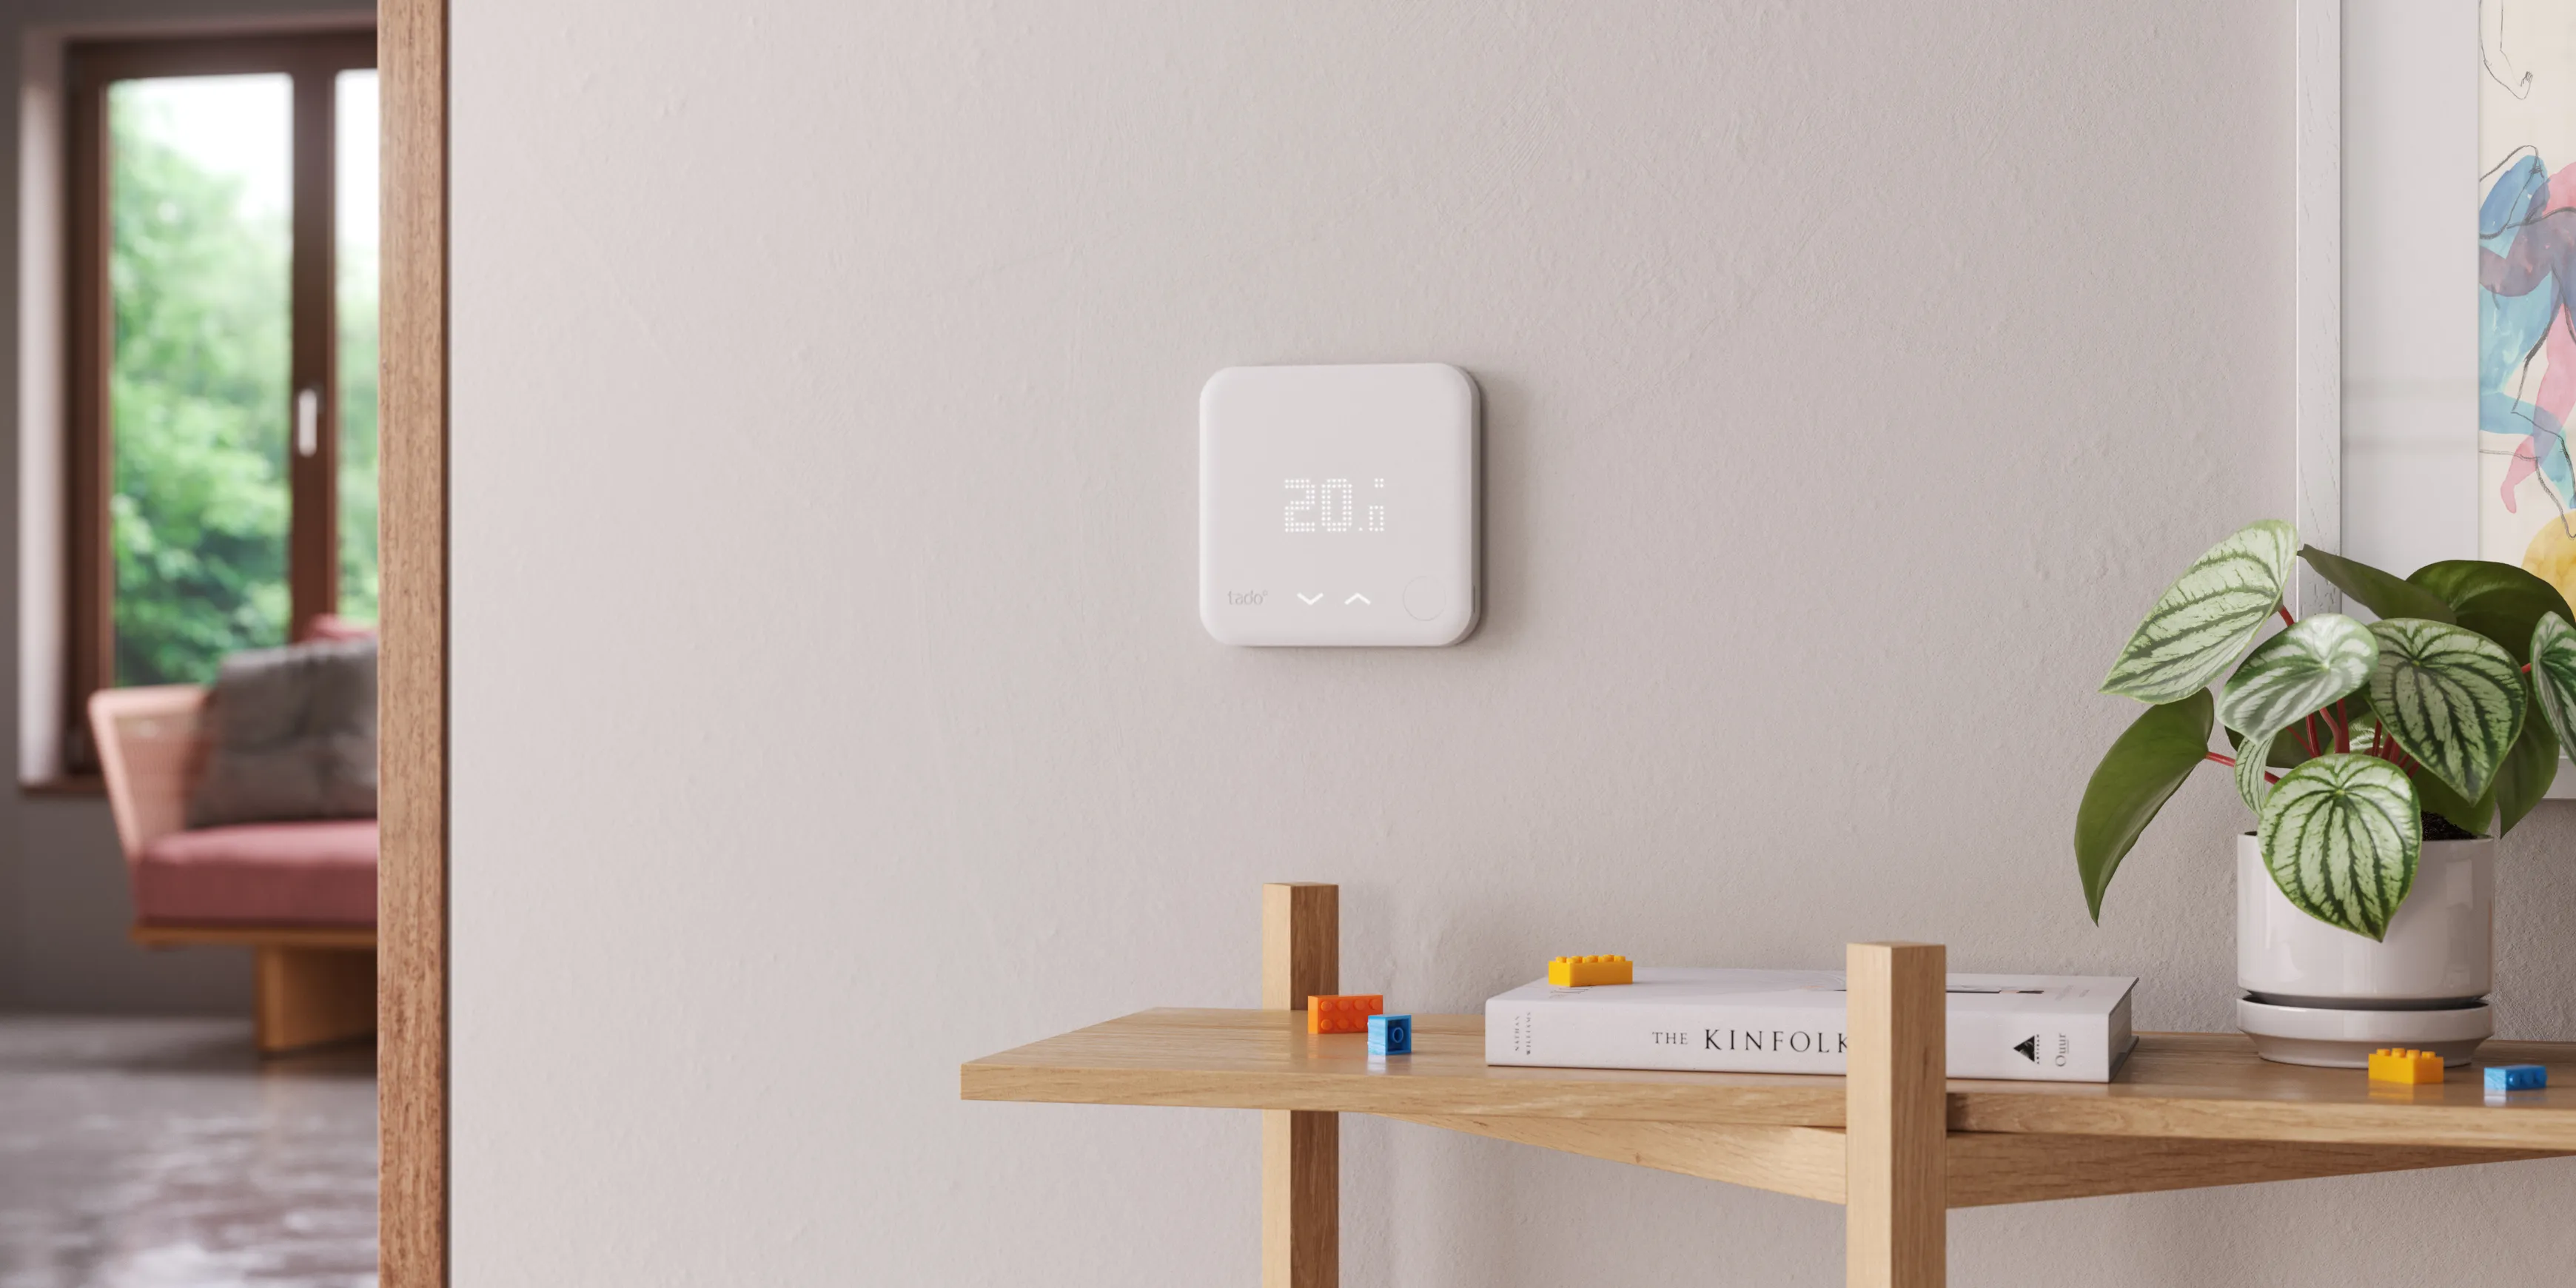 A tado smart thermostat on a wall in front of a wooden shelf